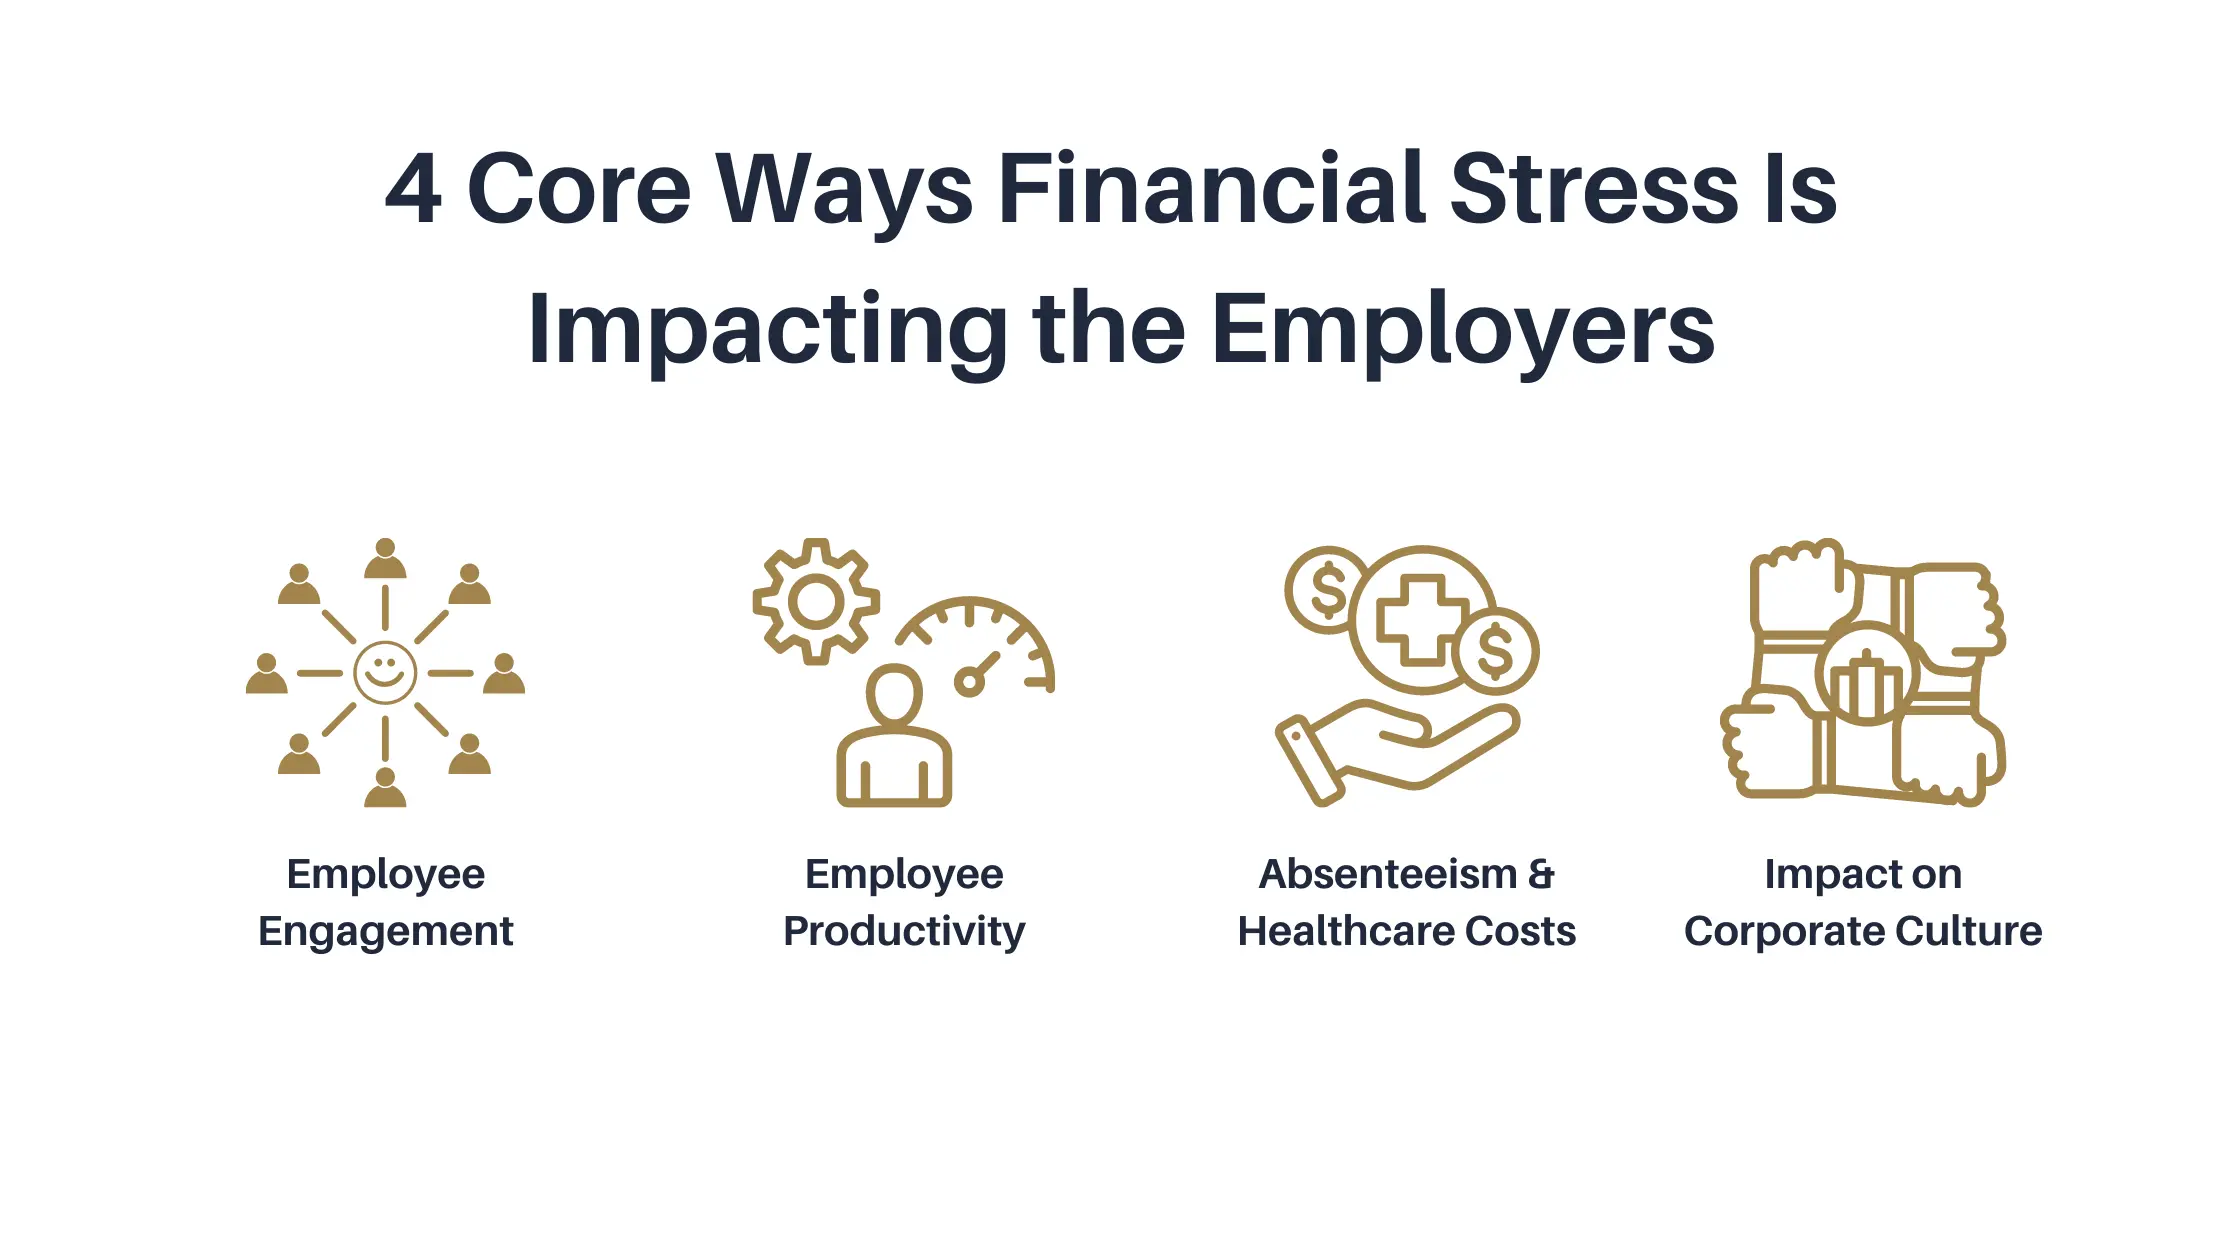 4 Core Ways Financial Stress Is Impacting the Employers